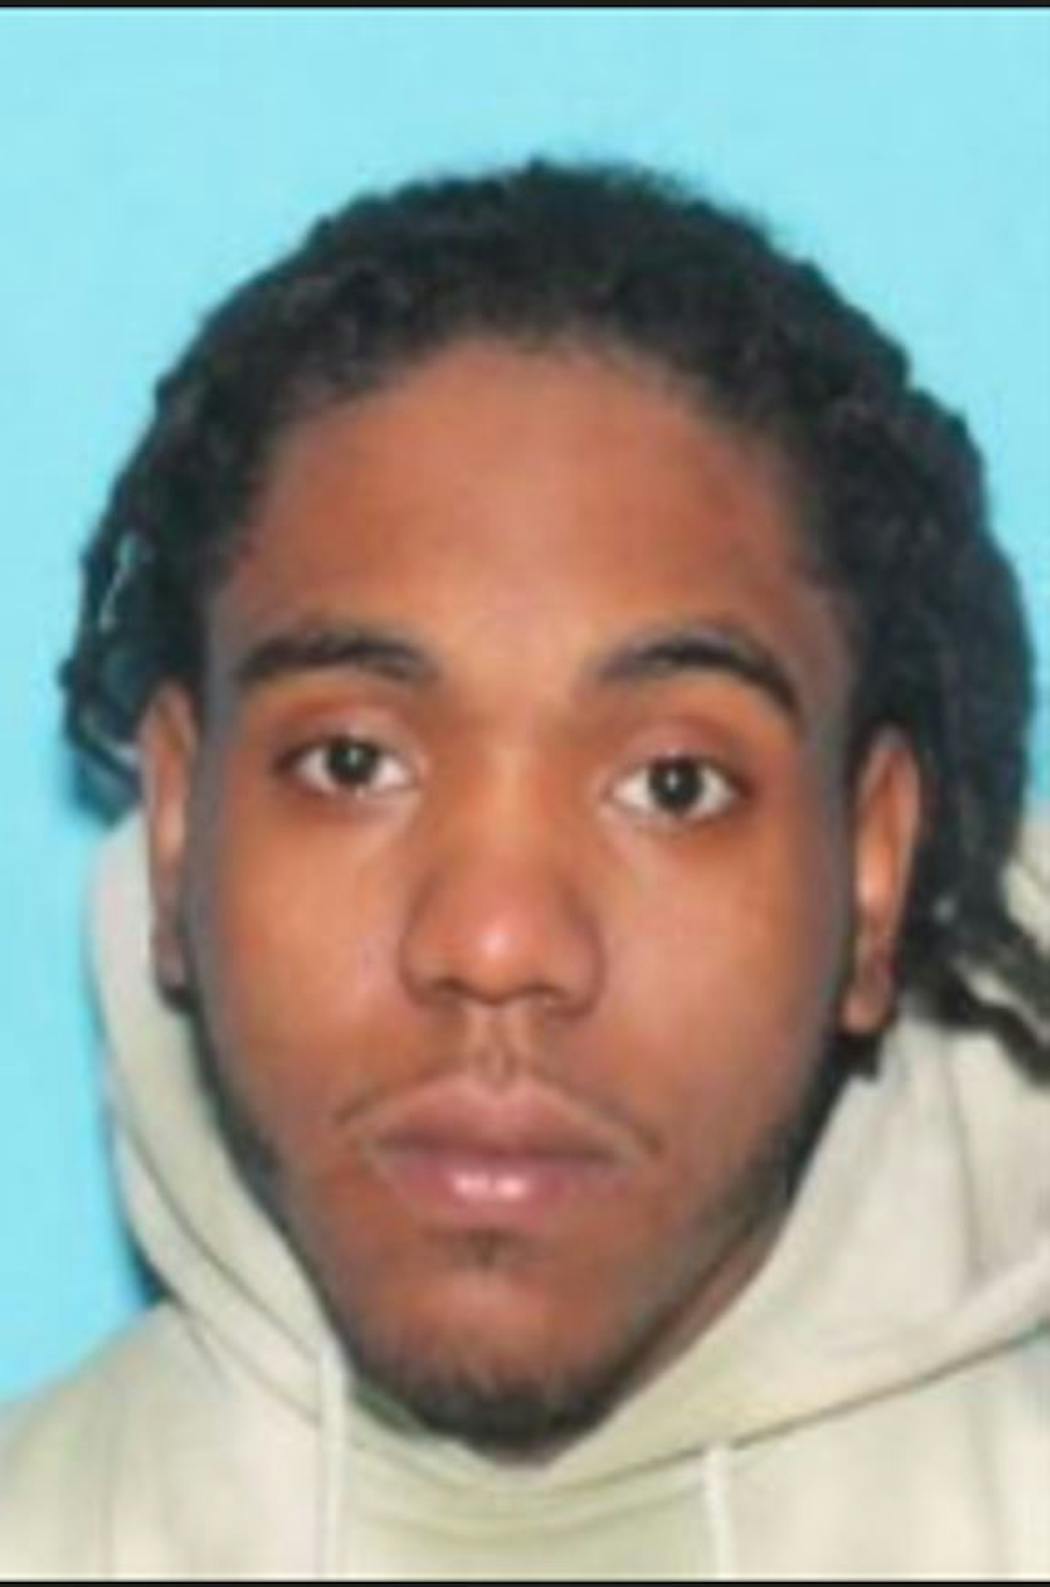 Plymouth Police have identified Daniel Hart as a suspect in a fatal shooting at a gas station on June 9.